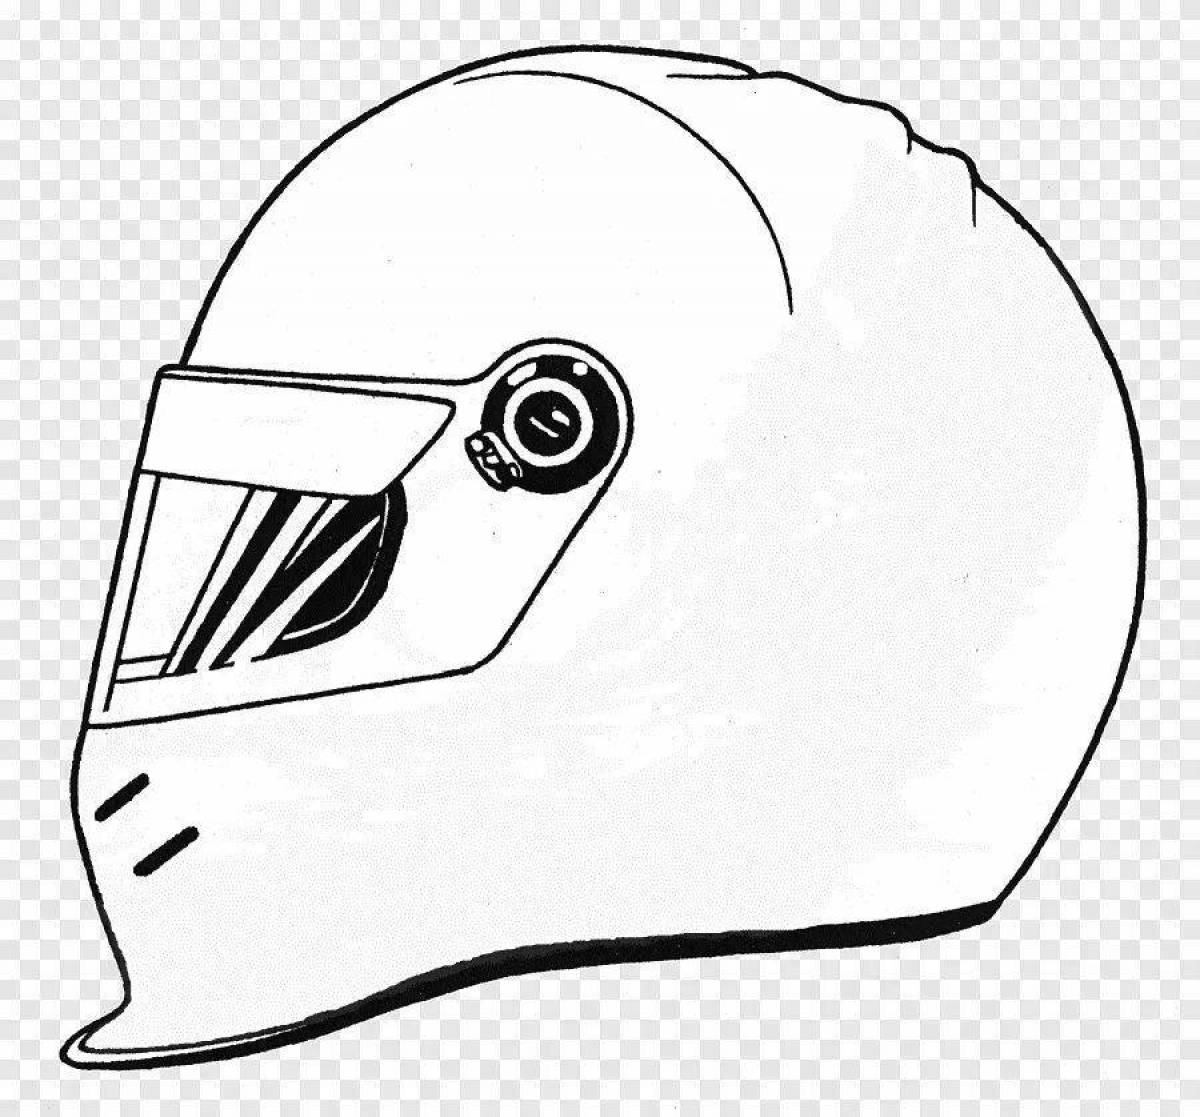 Gorgeous helmet coloring page